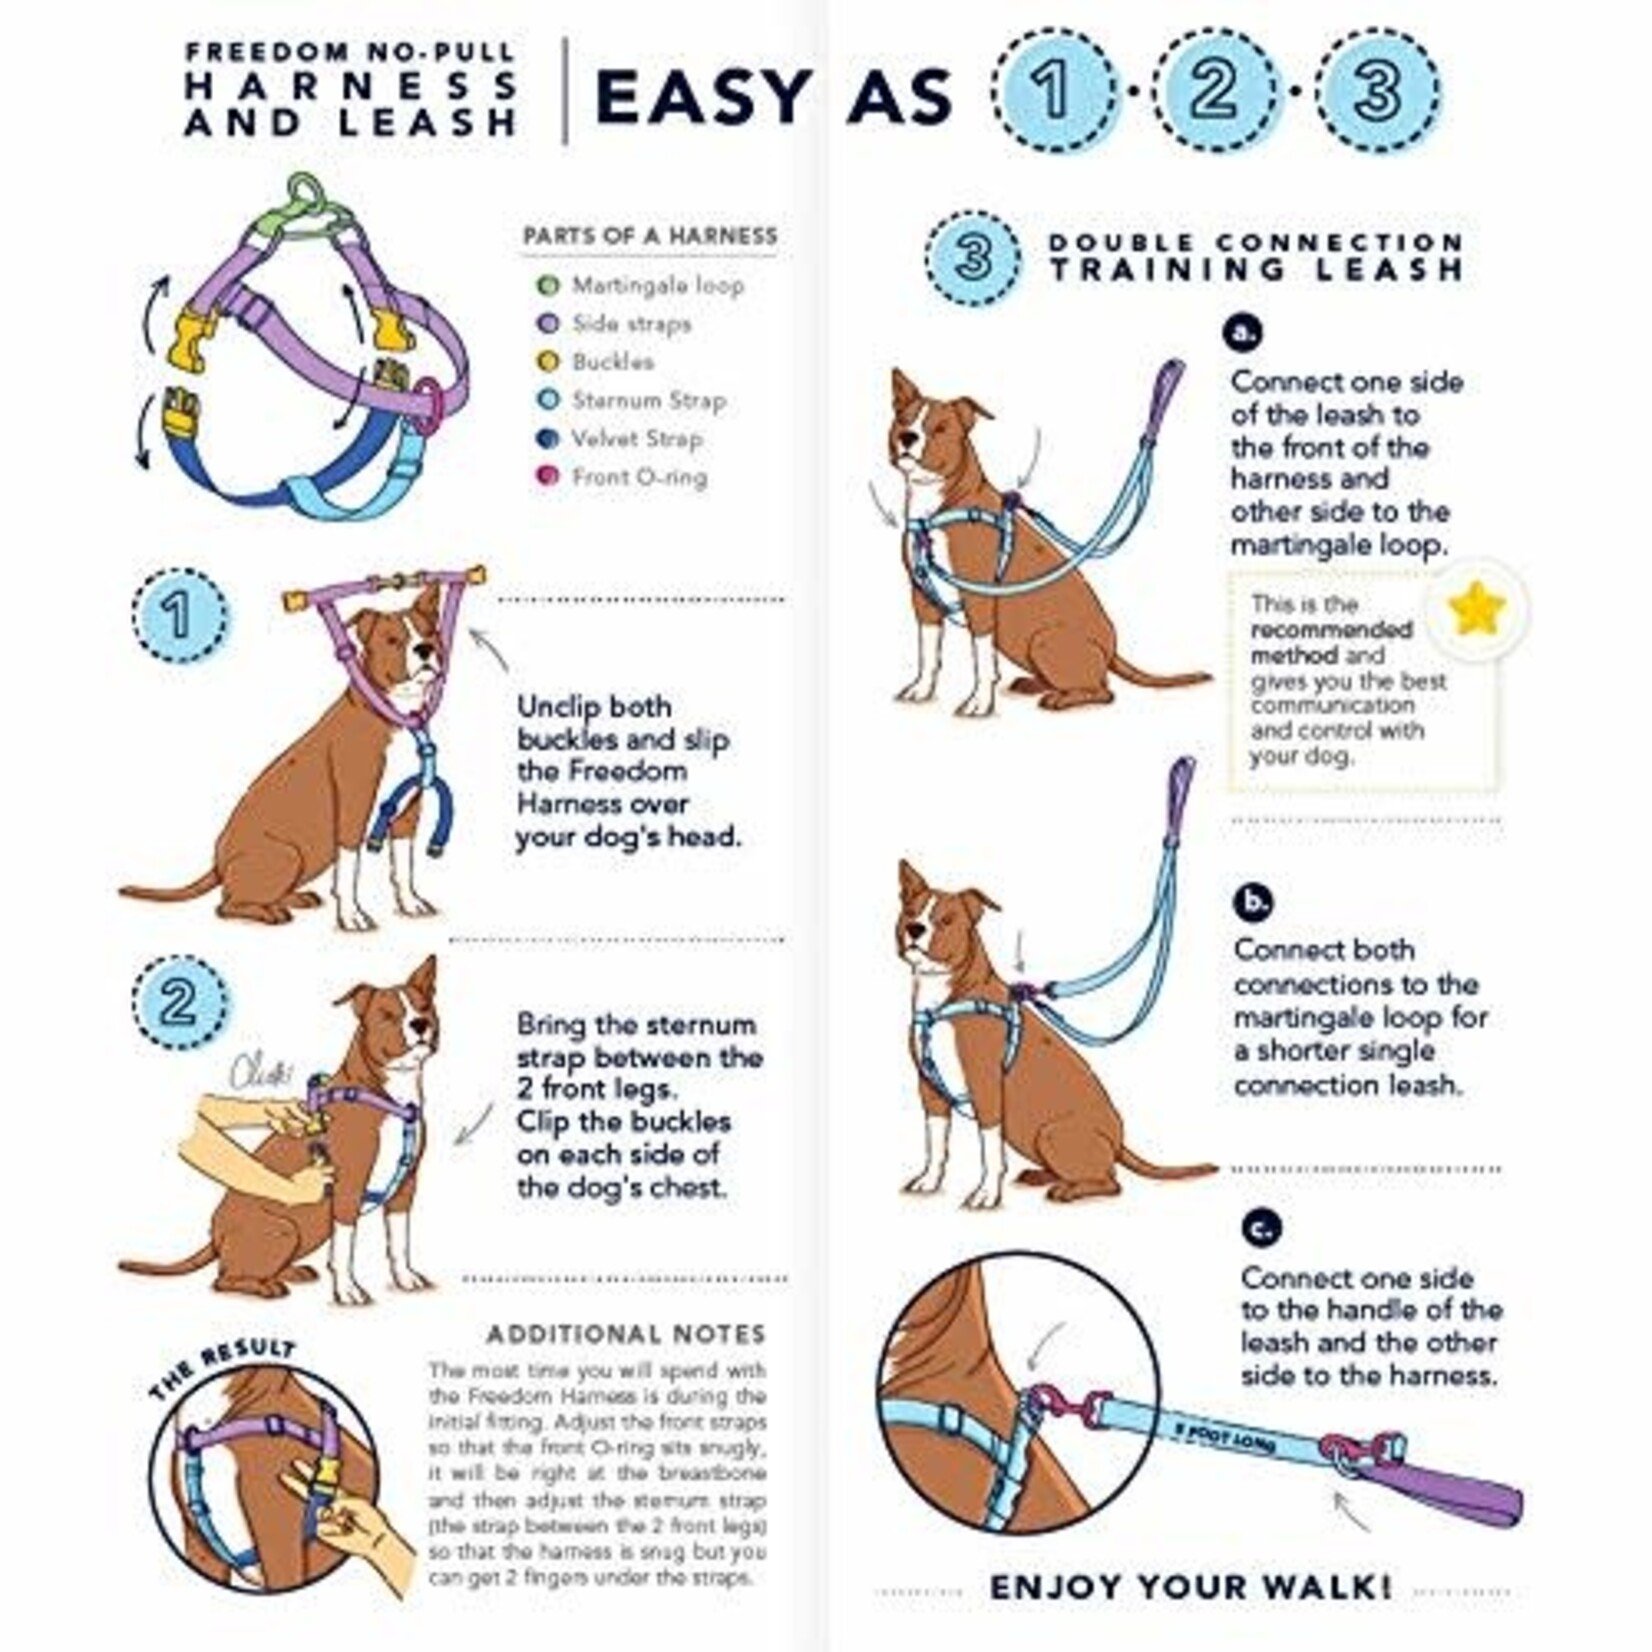 How to Make a Simple No-Pull Dog Harness From Things You May Already Have -  PetHelpful